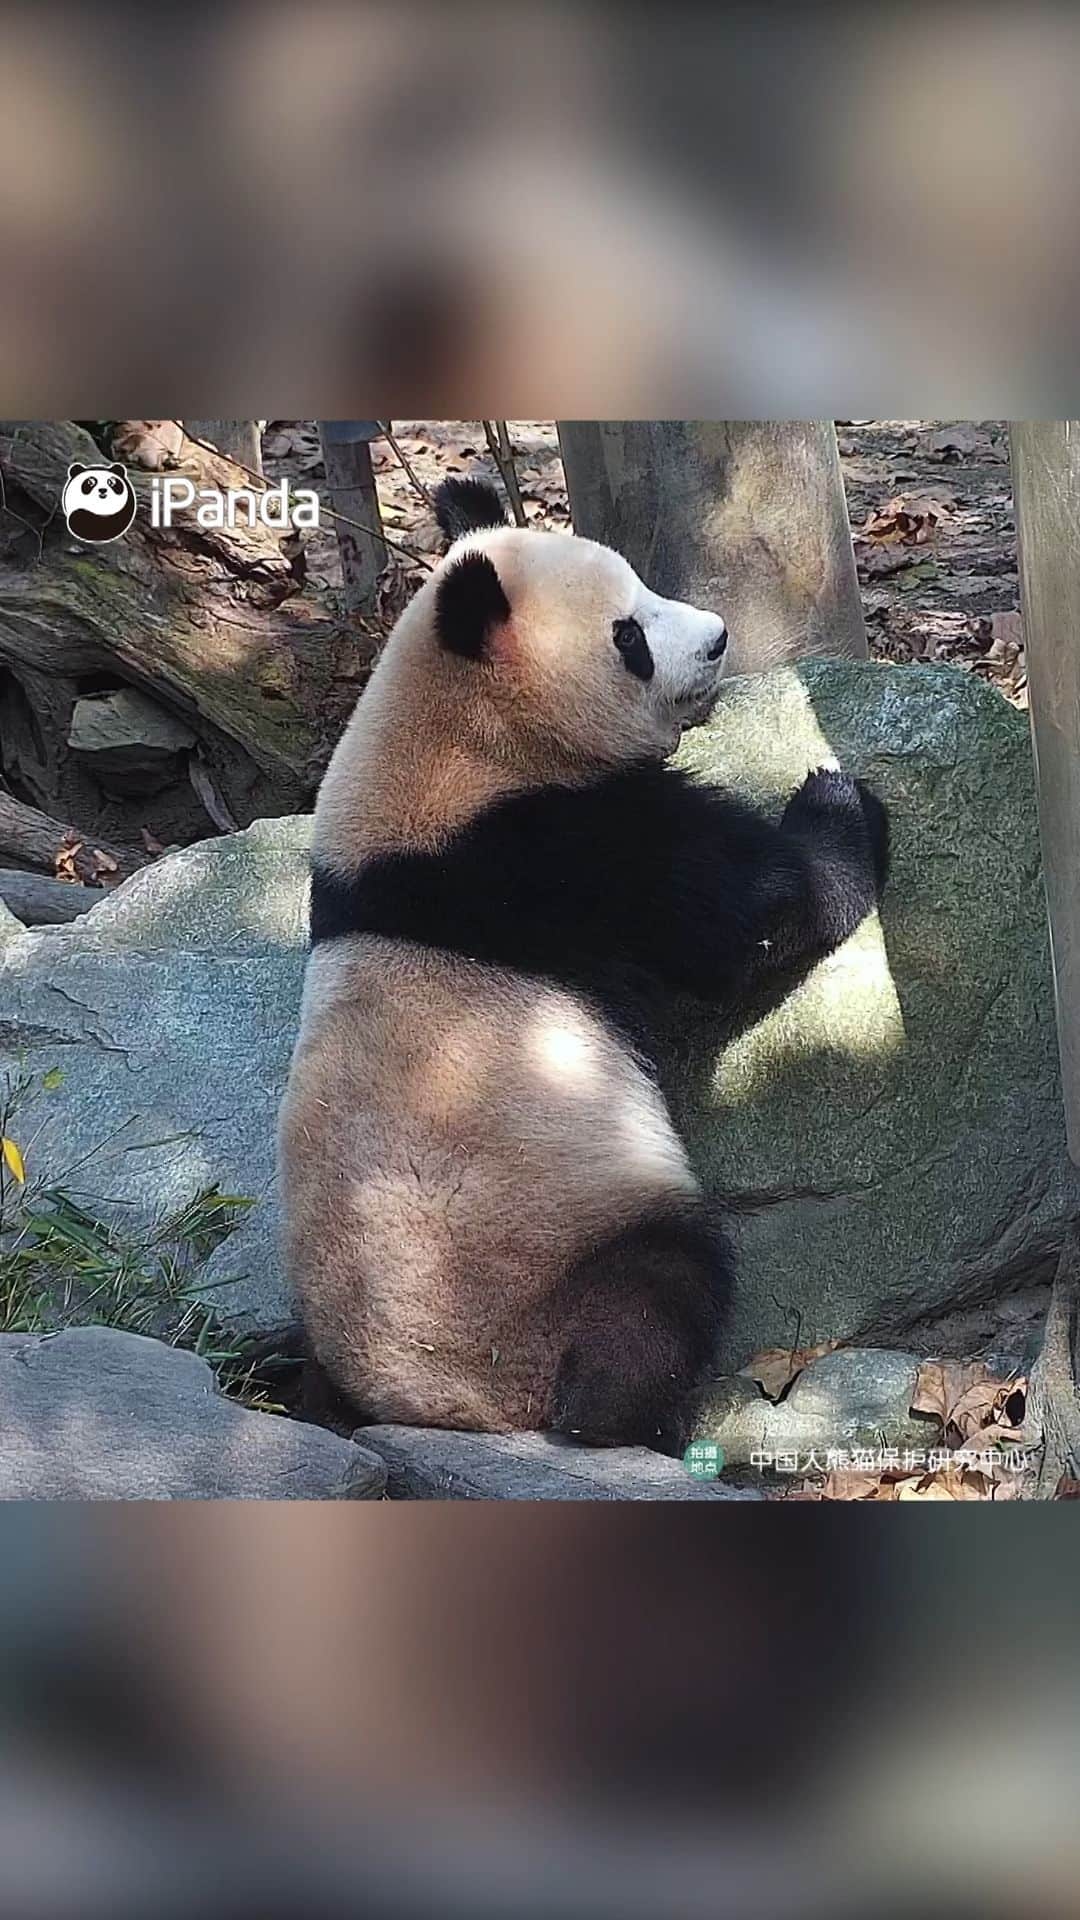 iPandaのインスタグラム：「Why are you whispering to the stone? You can also share your secrets with me. (Qing Lu) 🐼 🐼 🐼 #Panda #iPanda #Cute #HiPanda #PandaMoment #CCRCGP  For more panda information, please check out: https://en.ipanda.com」